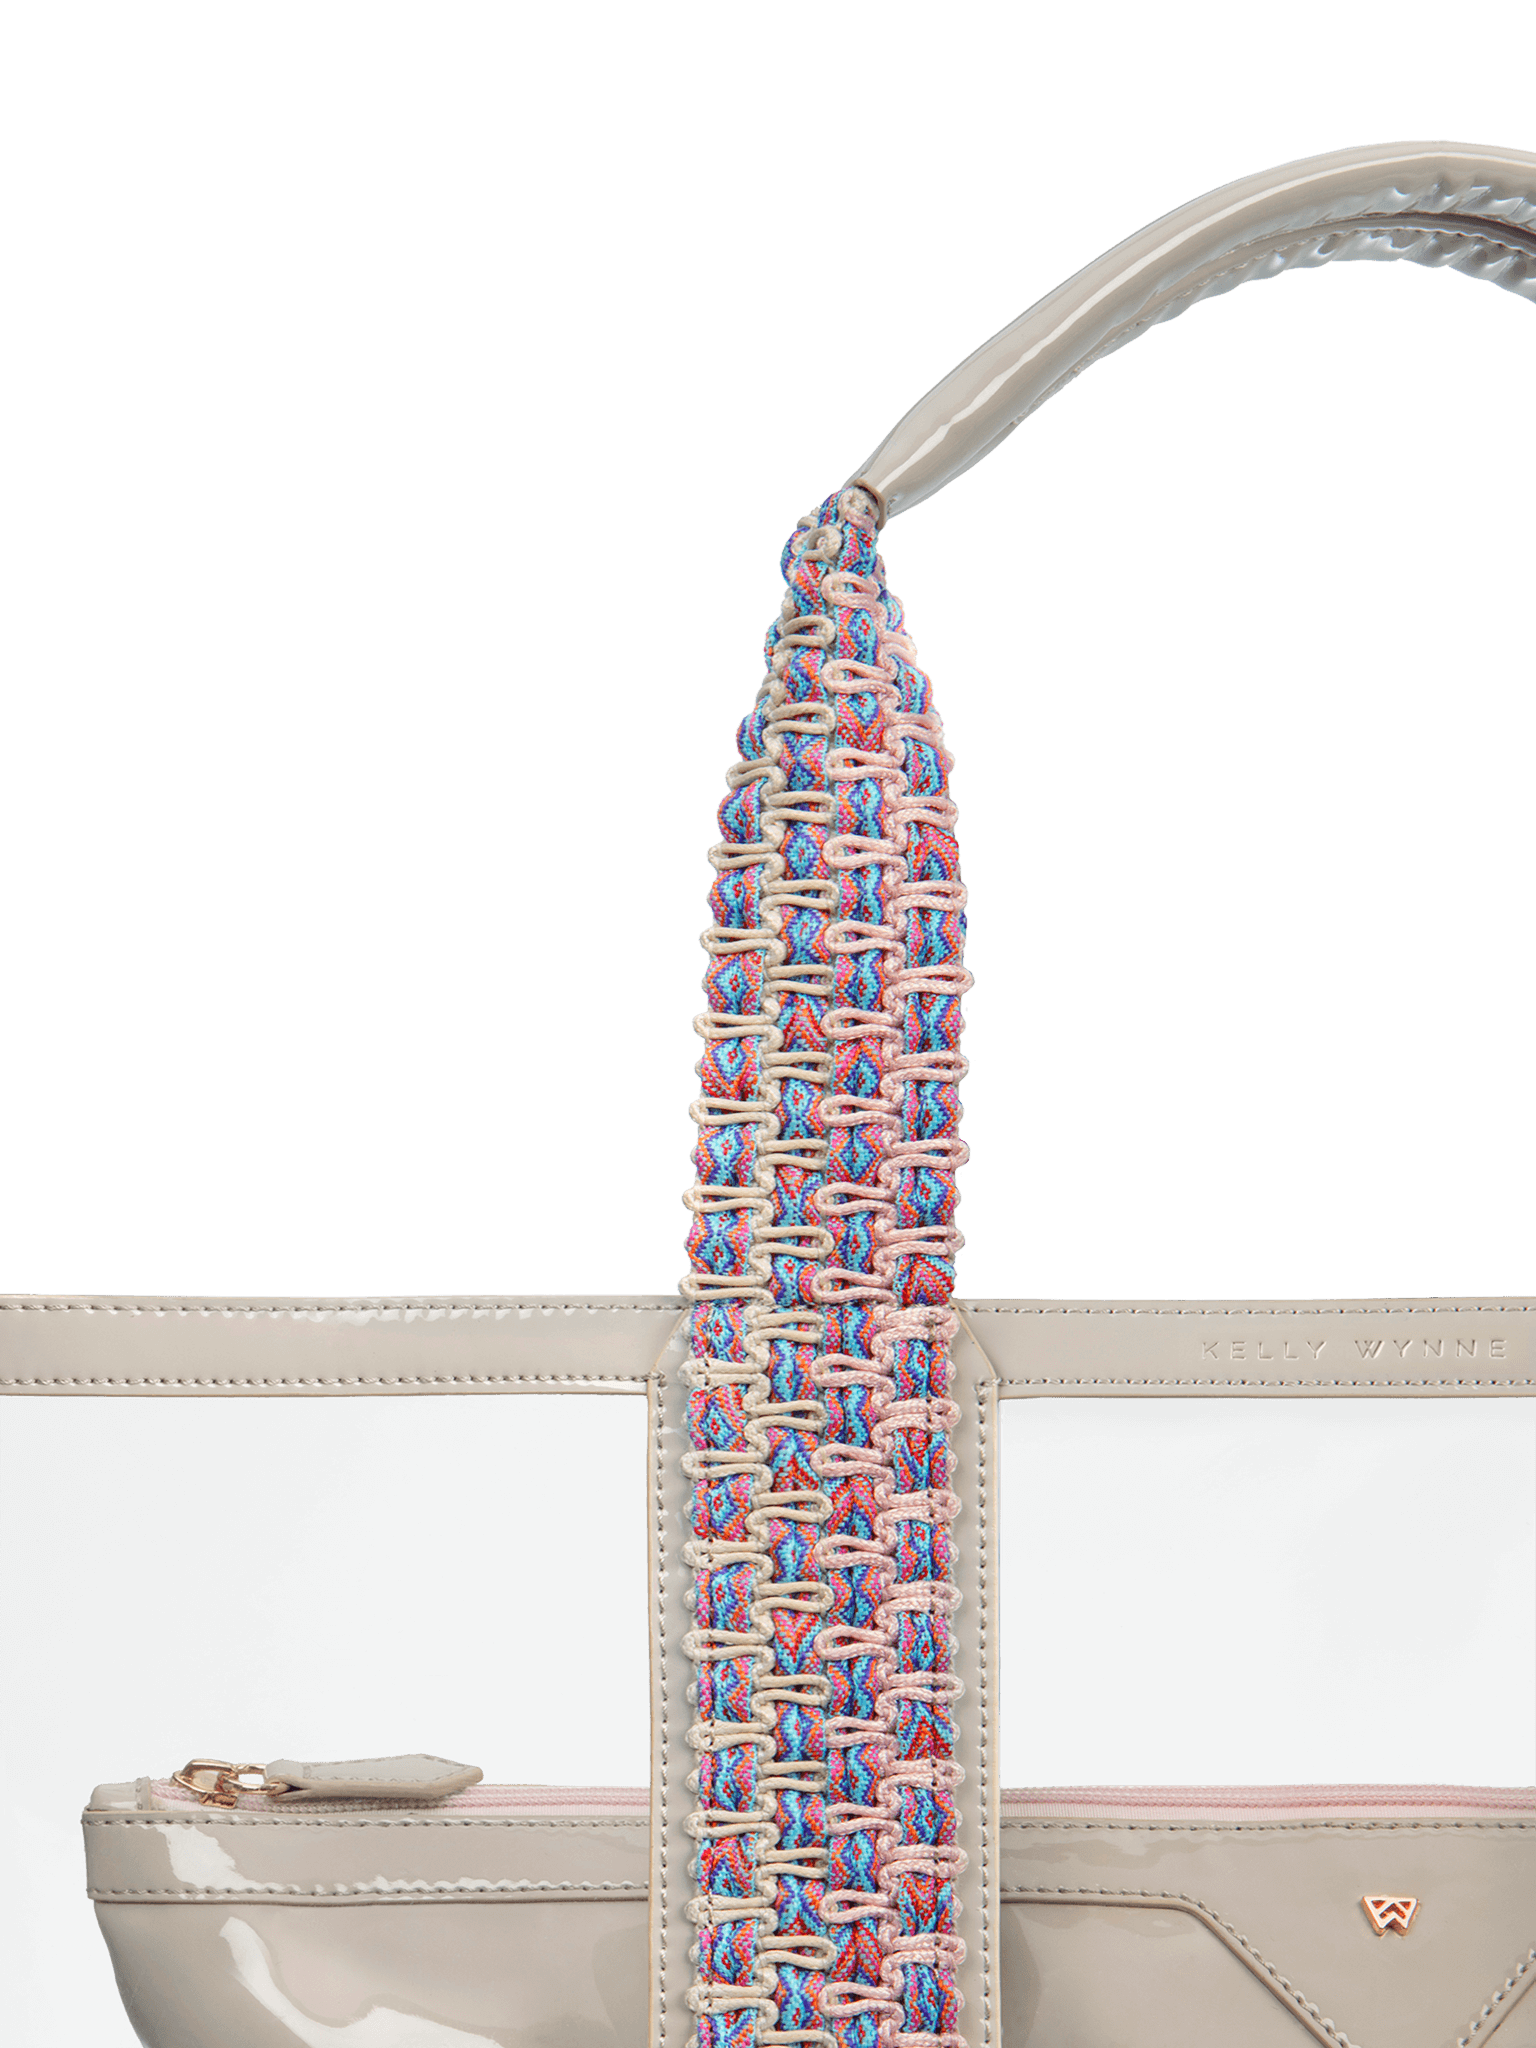 Hand woven, durable strap in pink and blue. Strap quality ensures your bag can stand up to all your water activities, making this tote easy and comfortable to carry. 